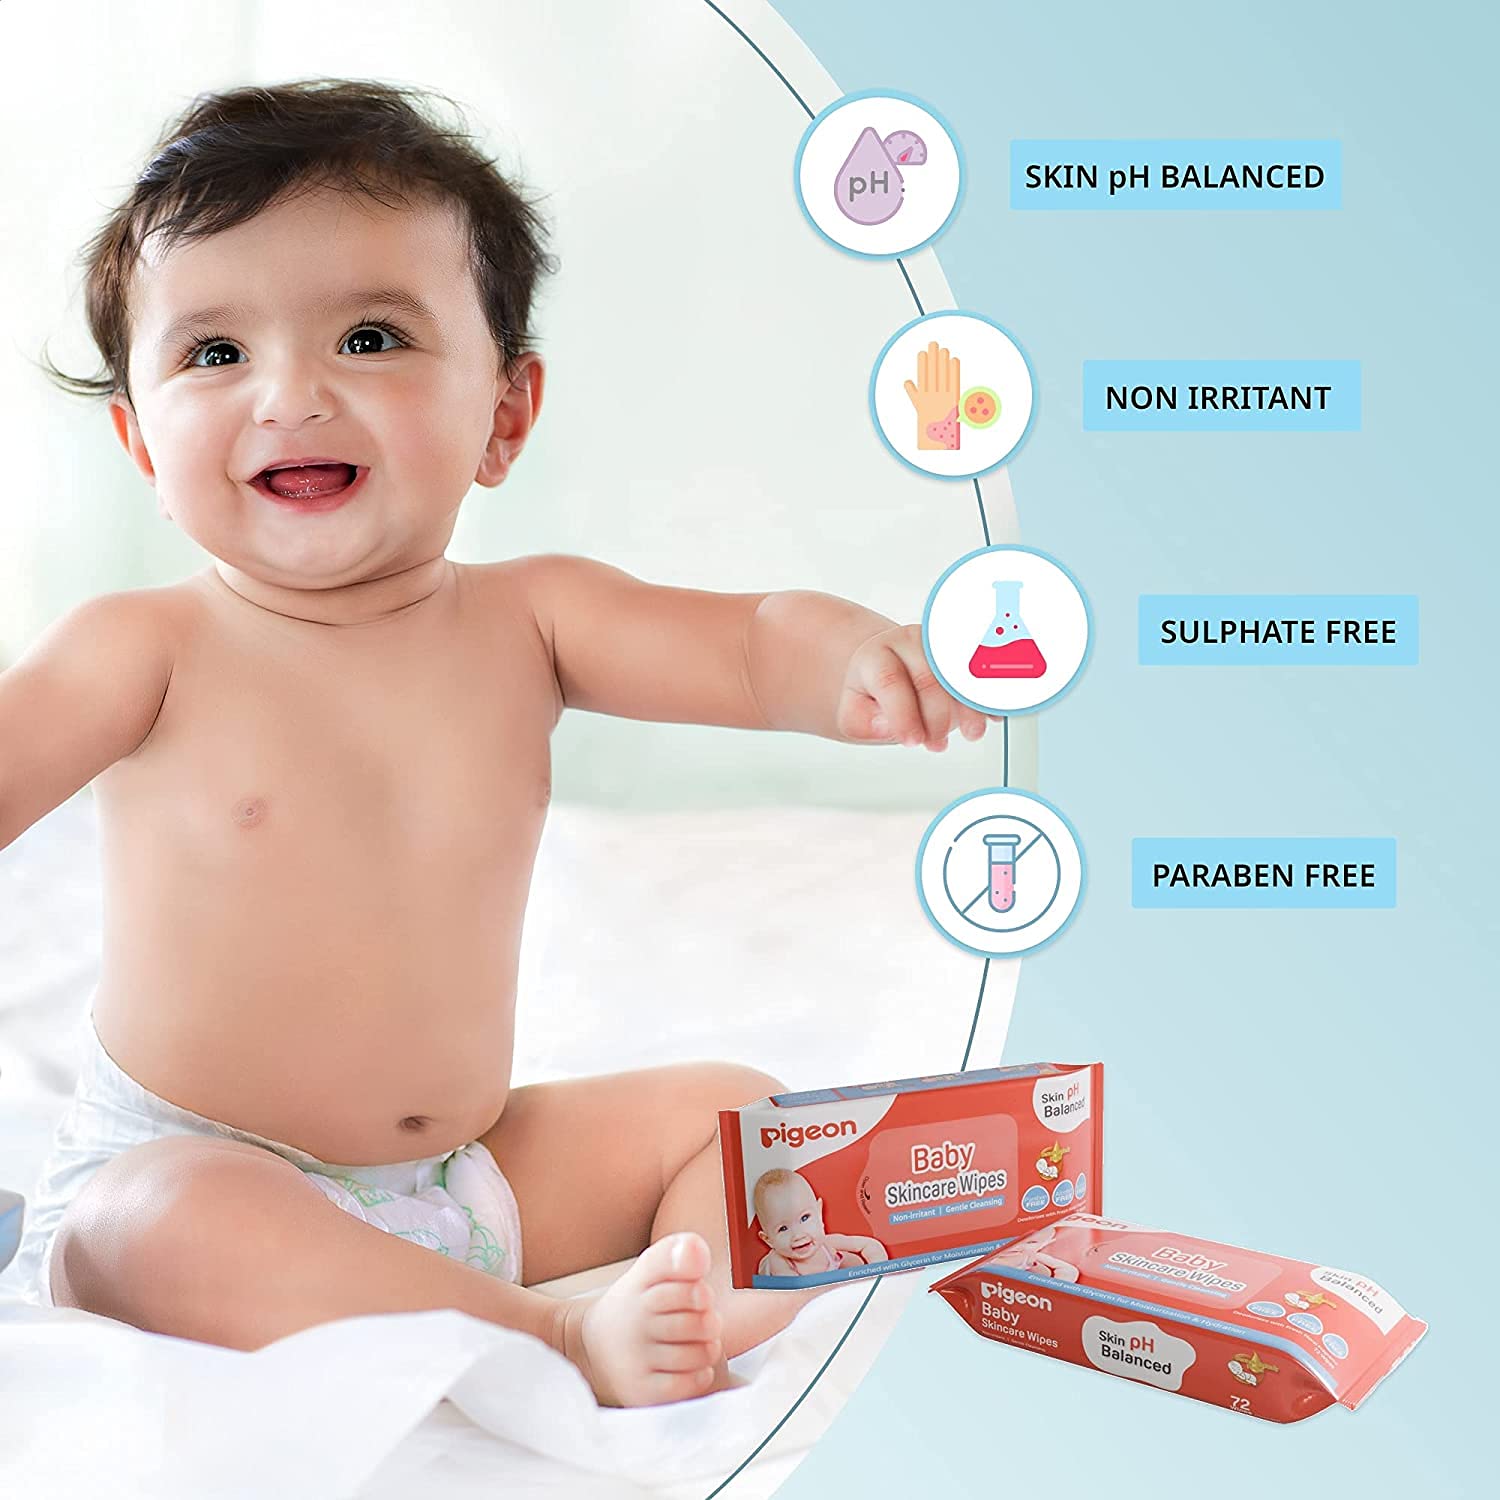 PIGEON Baby Skincare Wipes - 5Pack - 72pcs each